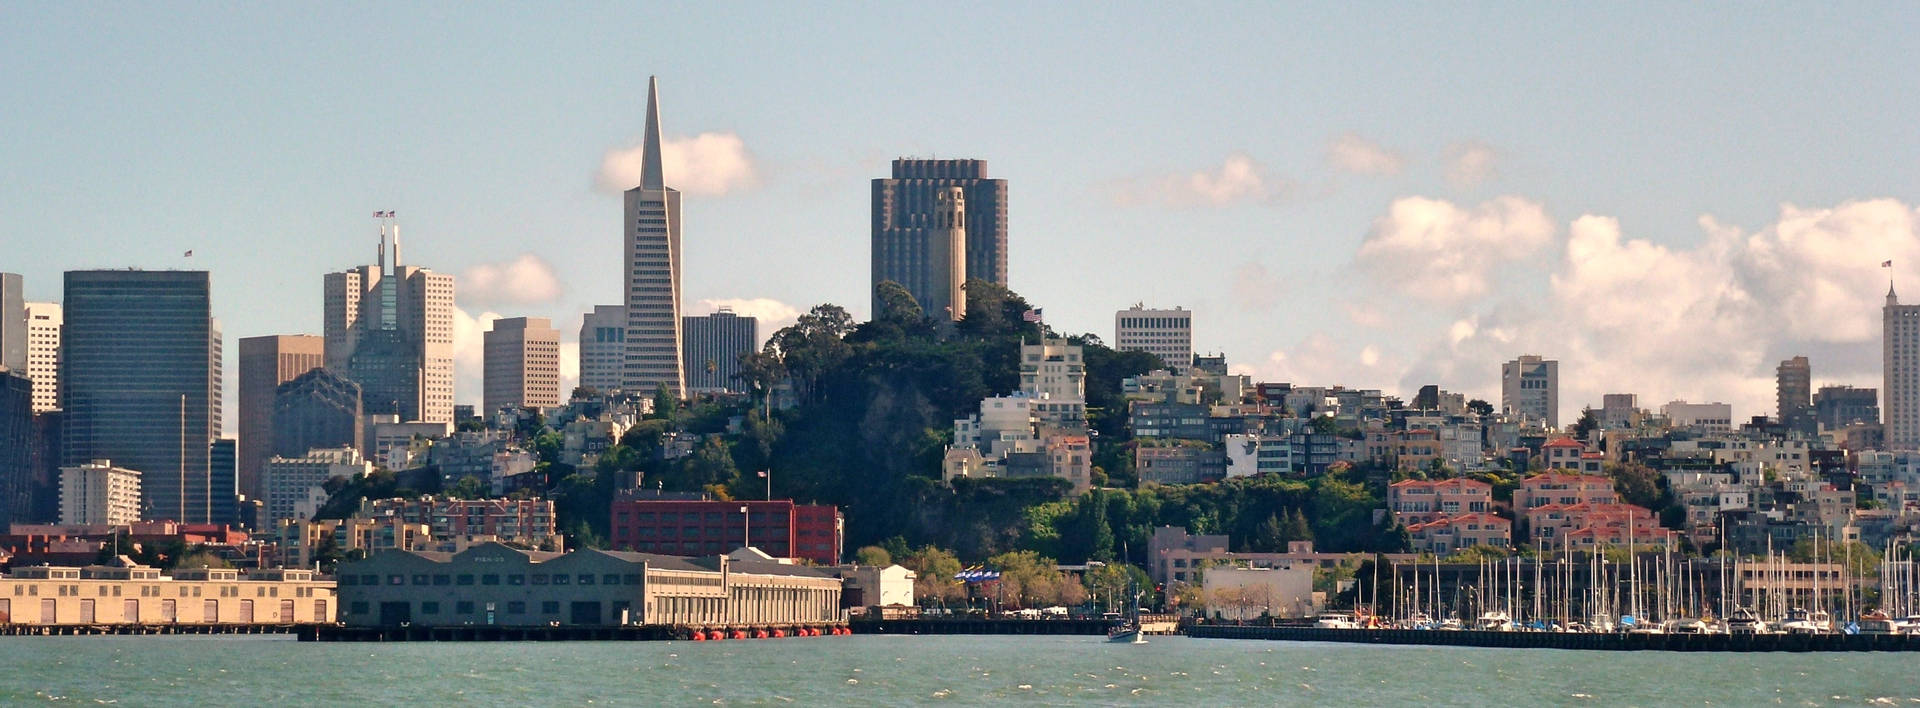 Coit Tower Daytime View Wallpaper